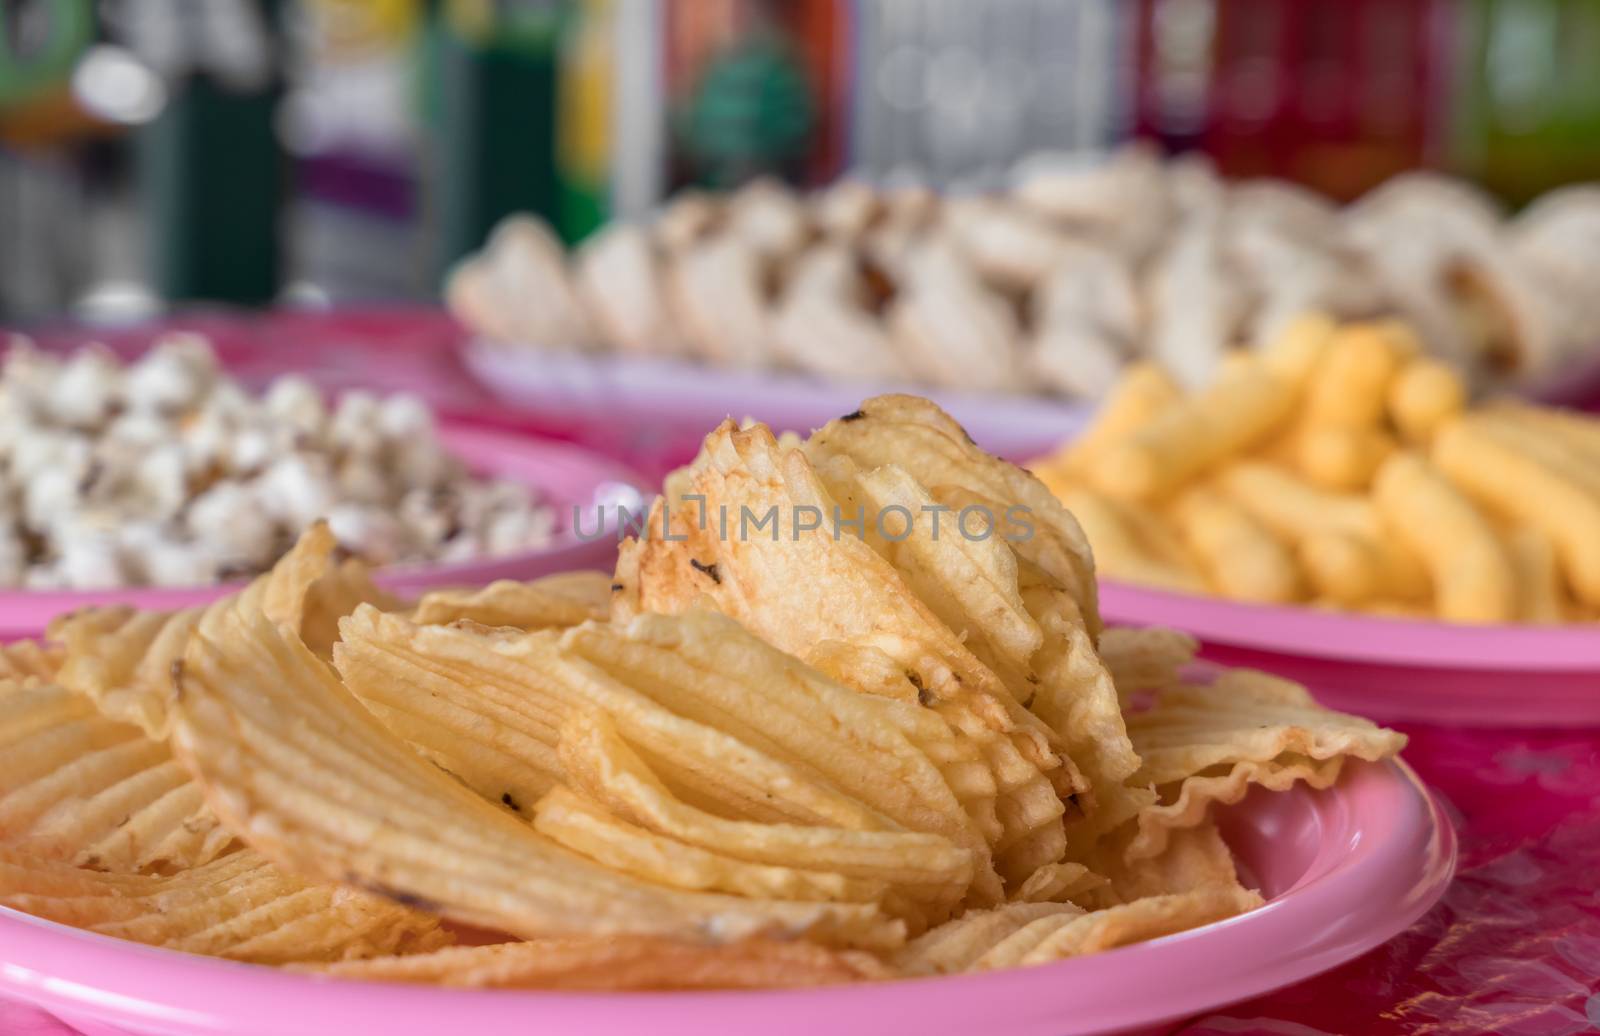 Junk food for party, birthday and every event. In the foreground wavy potato chips. On defocused background, popcorn and mini pizzas.